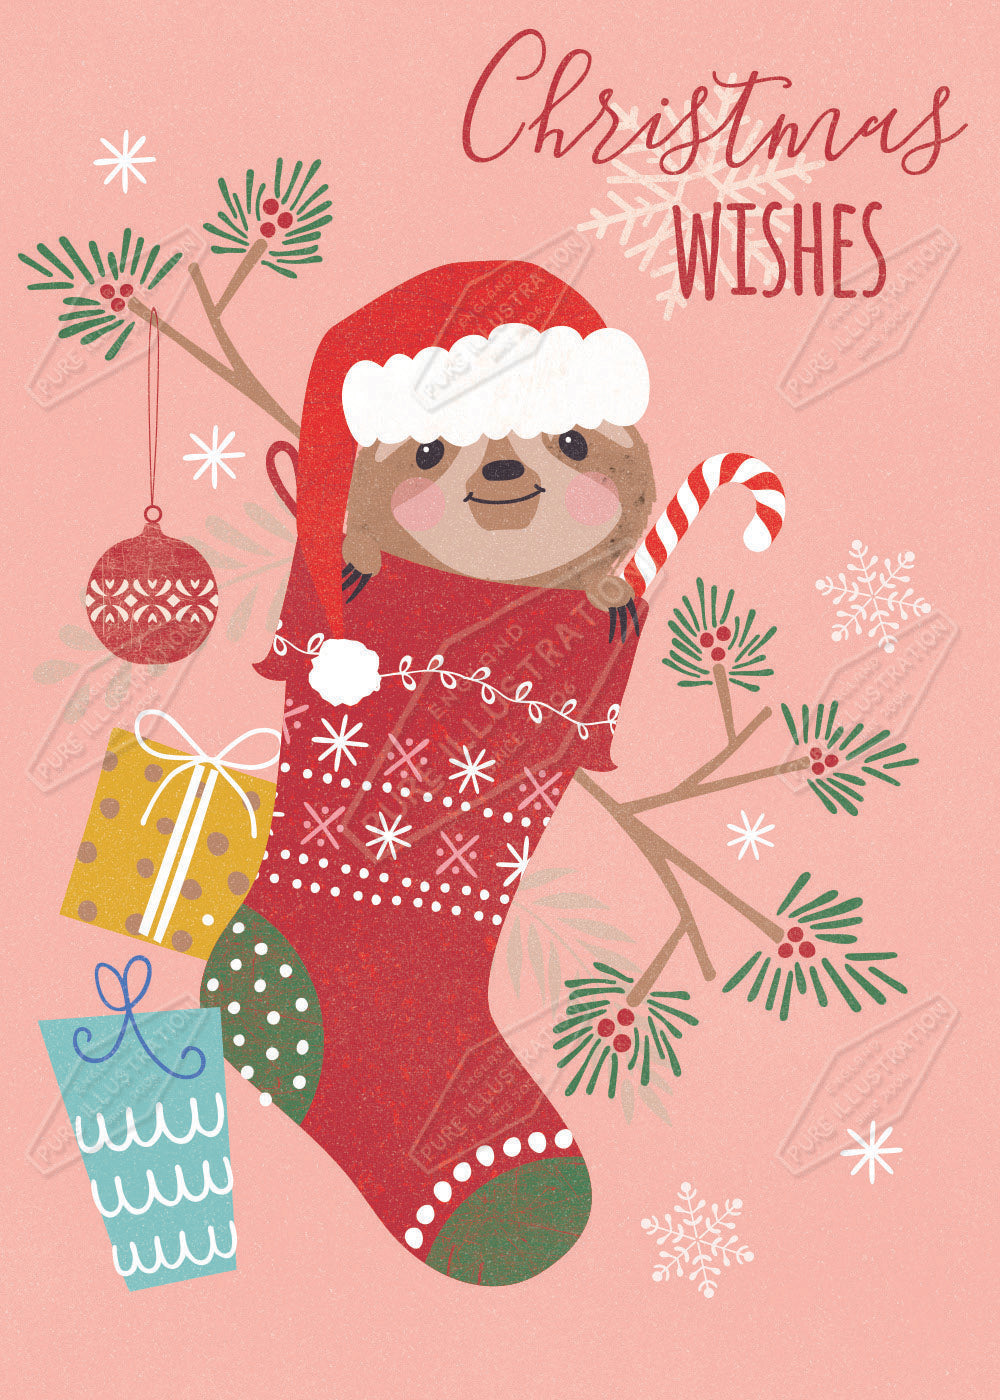 Sloth Christmas Design by Gill Eggleston for Pure Art Licensing Agency & Surface Design Studio